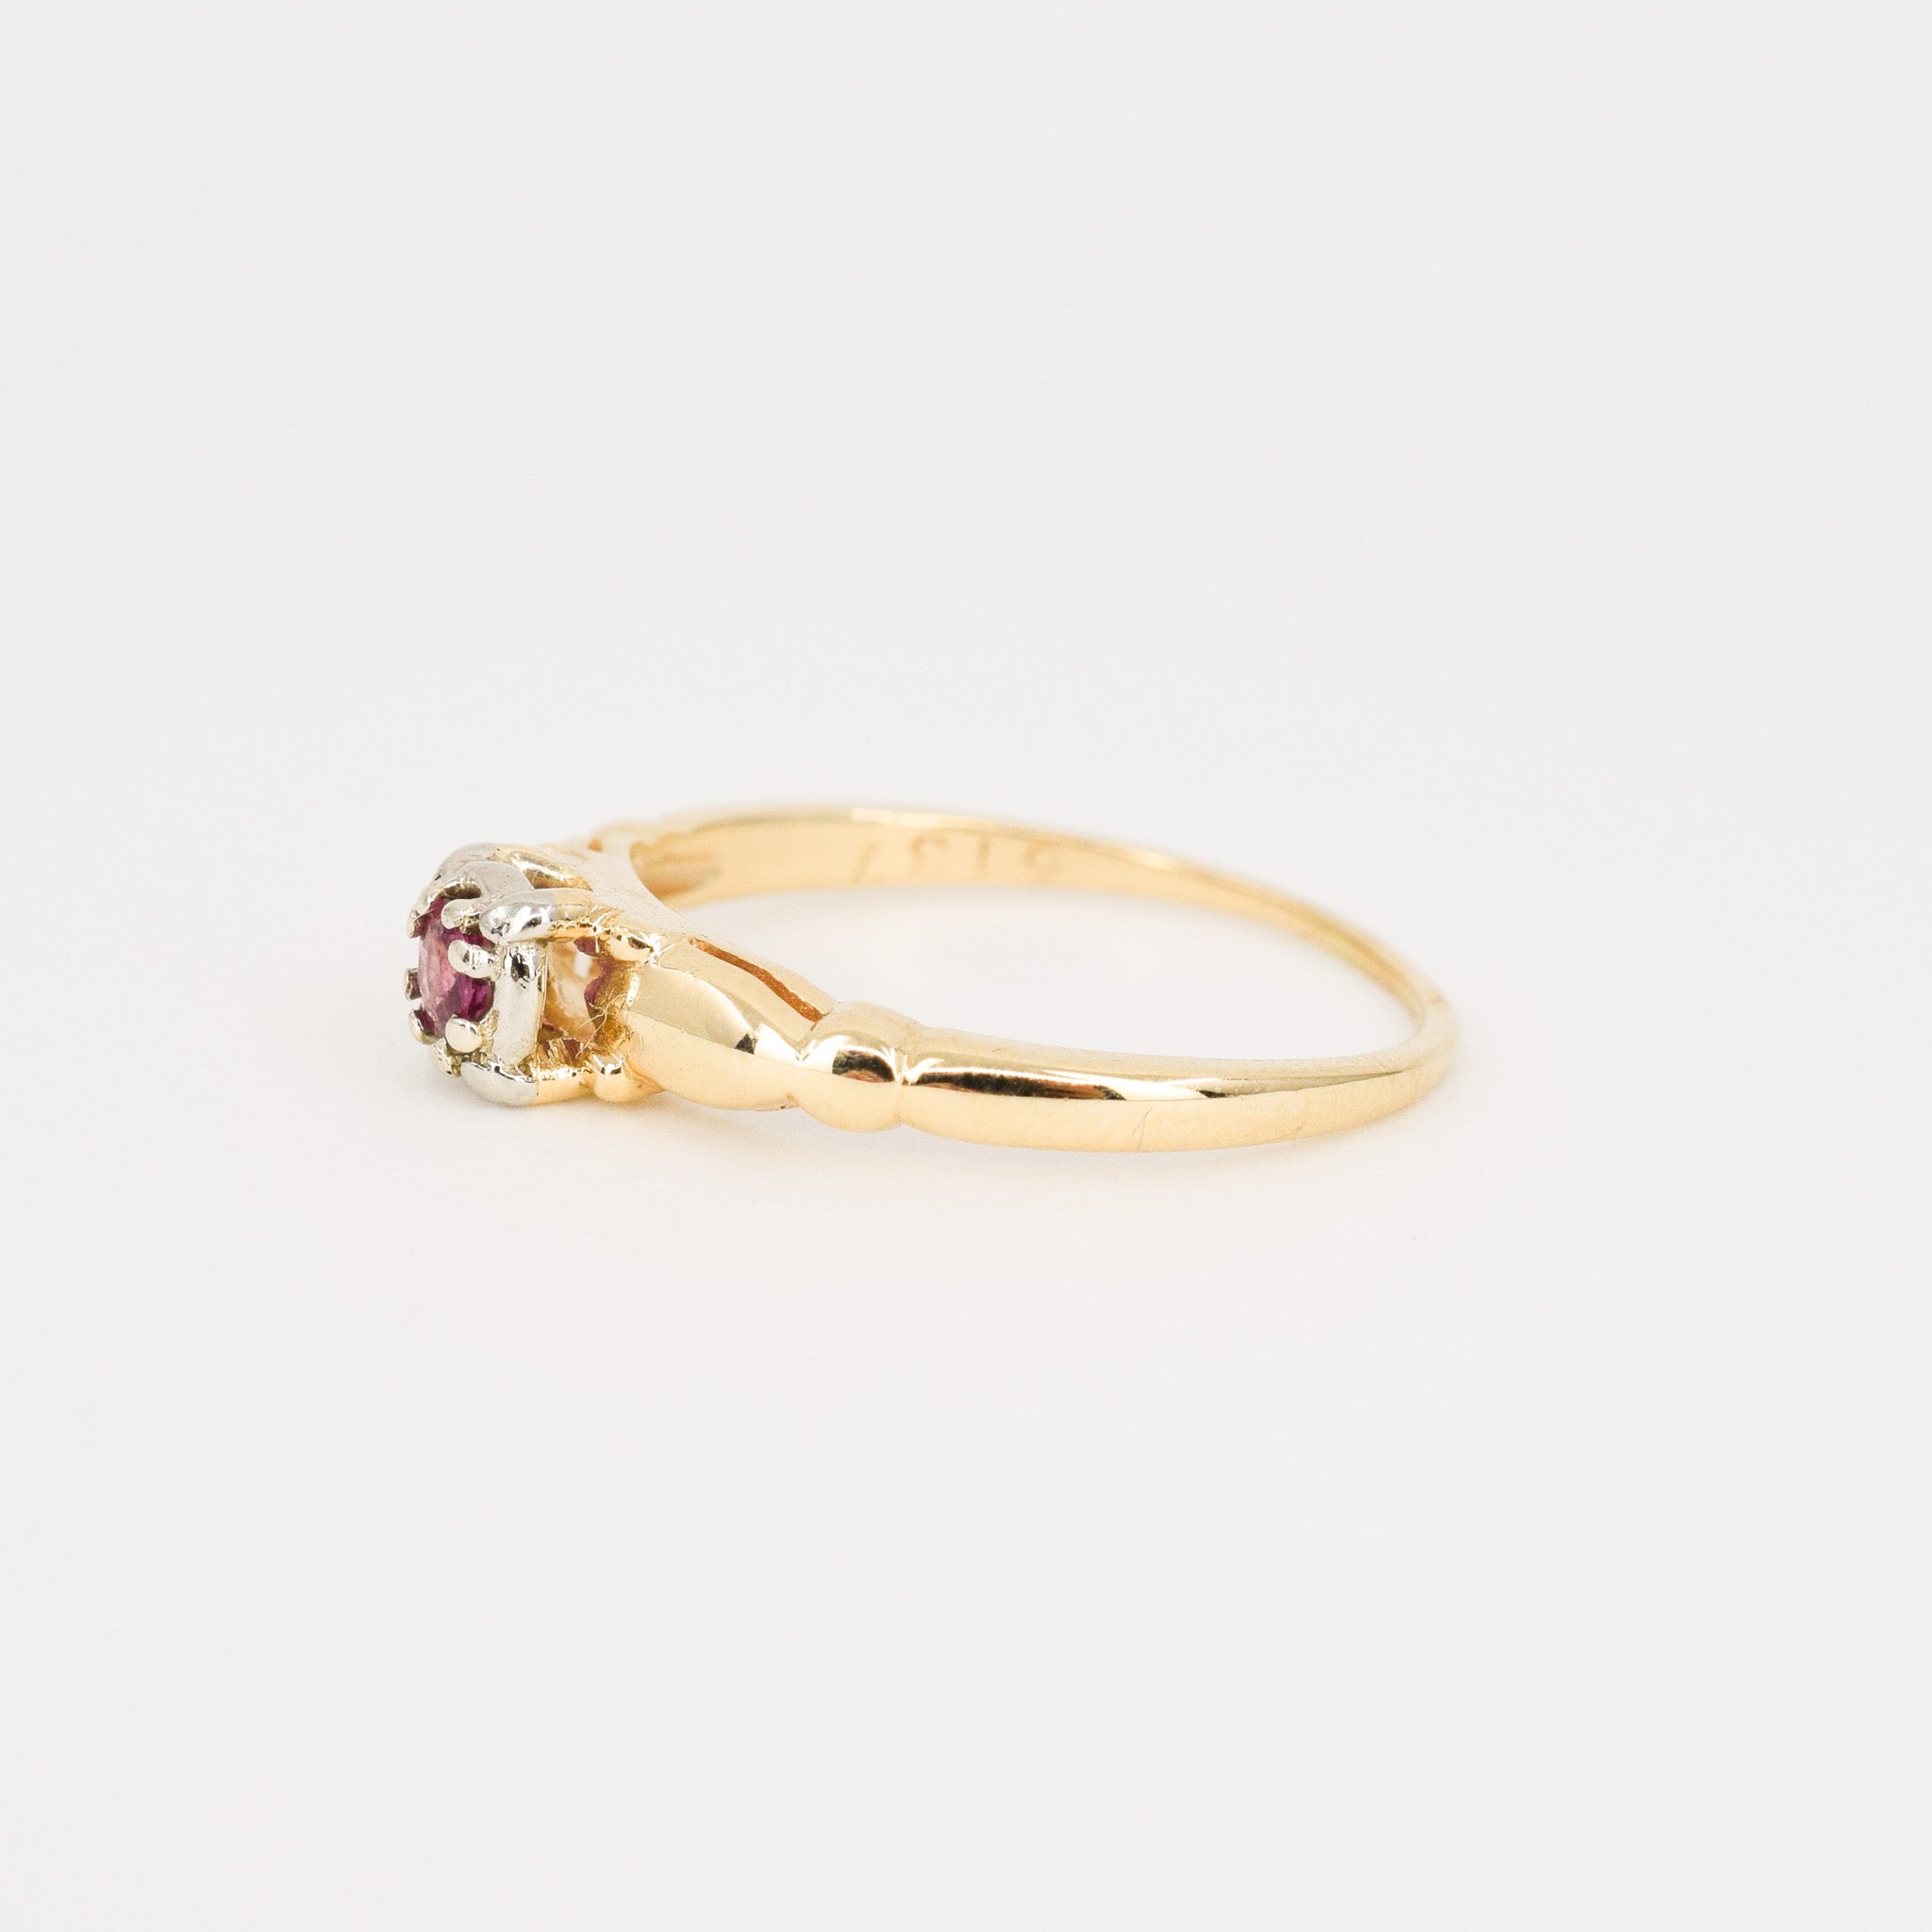 vintage dainty ruby ring, folklor vintage jewelry canada